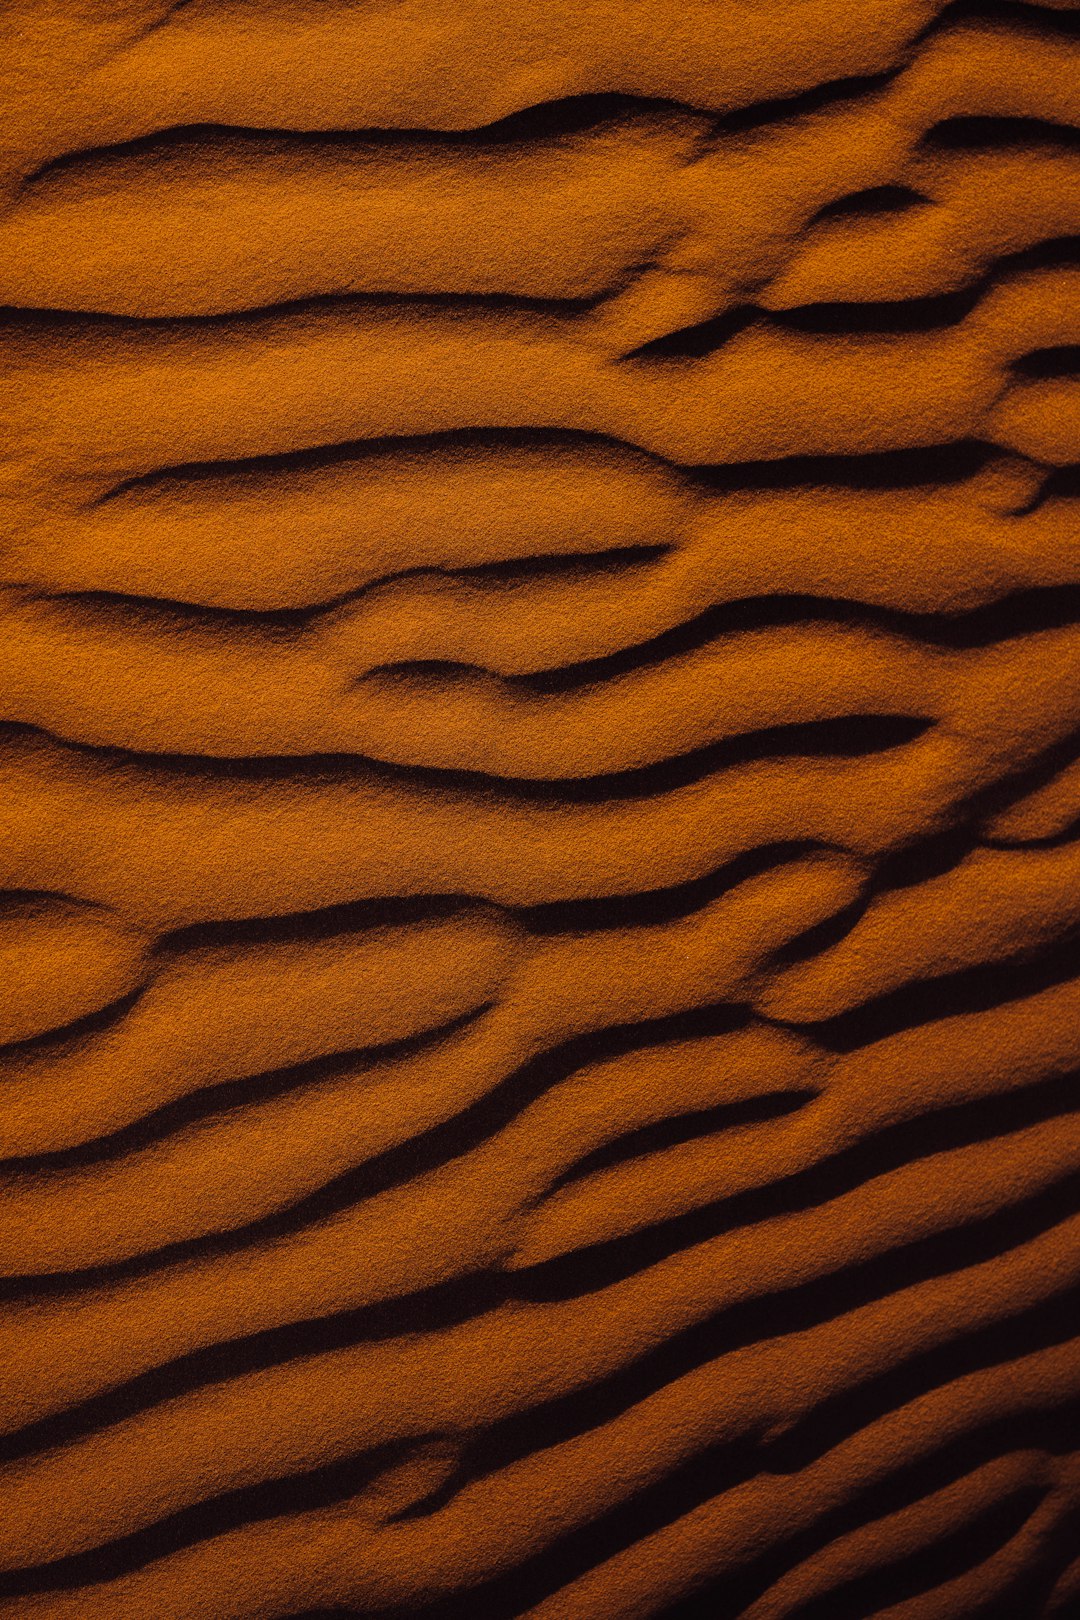 brown sand in close up photography